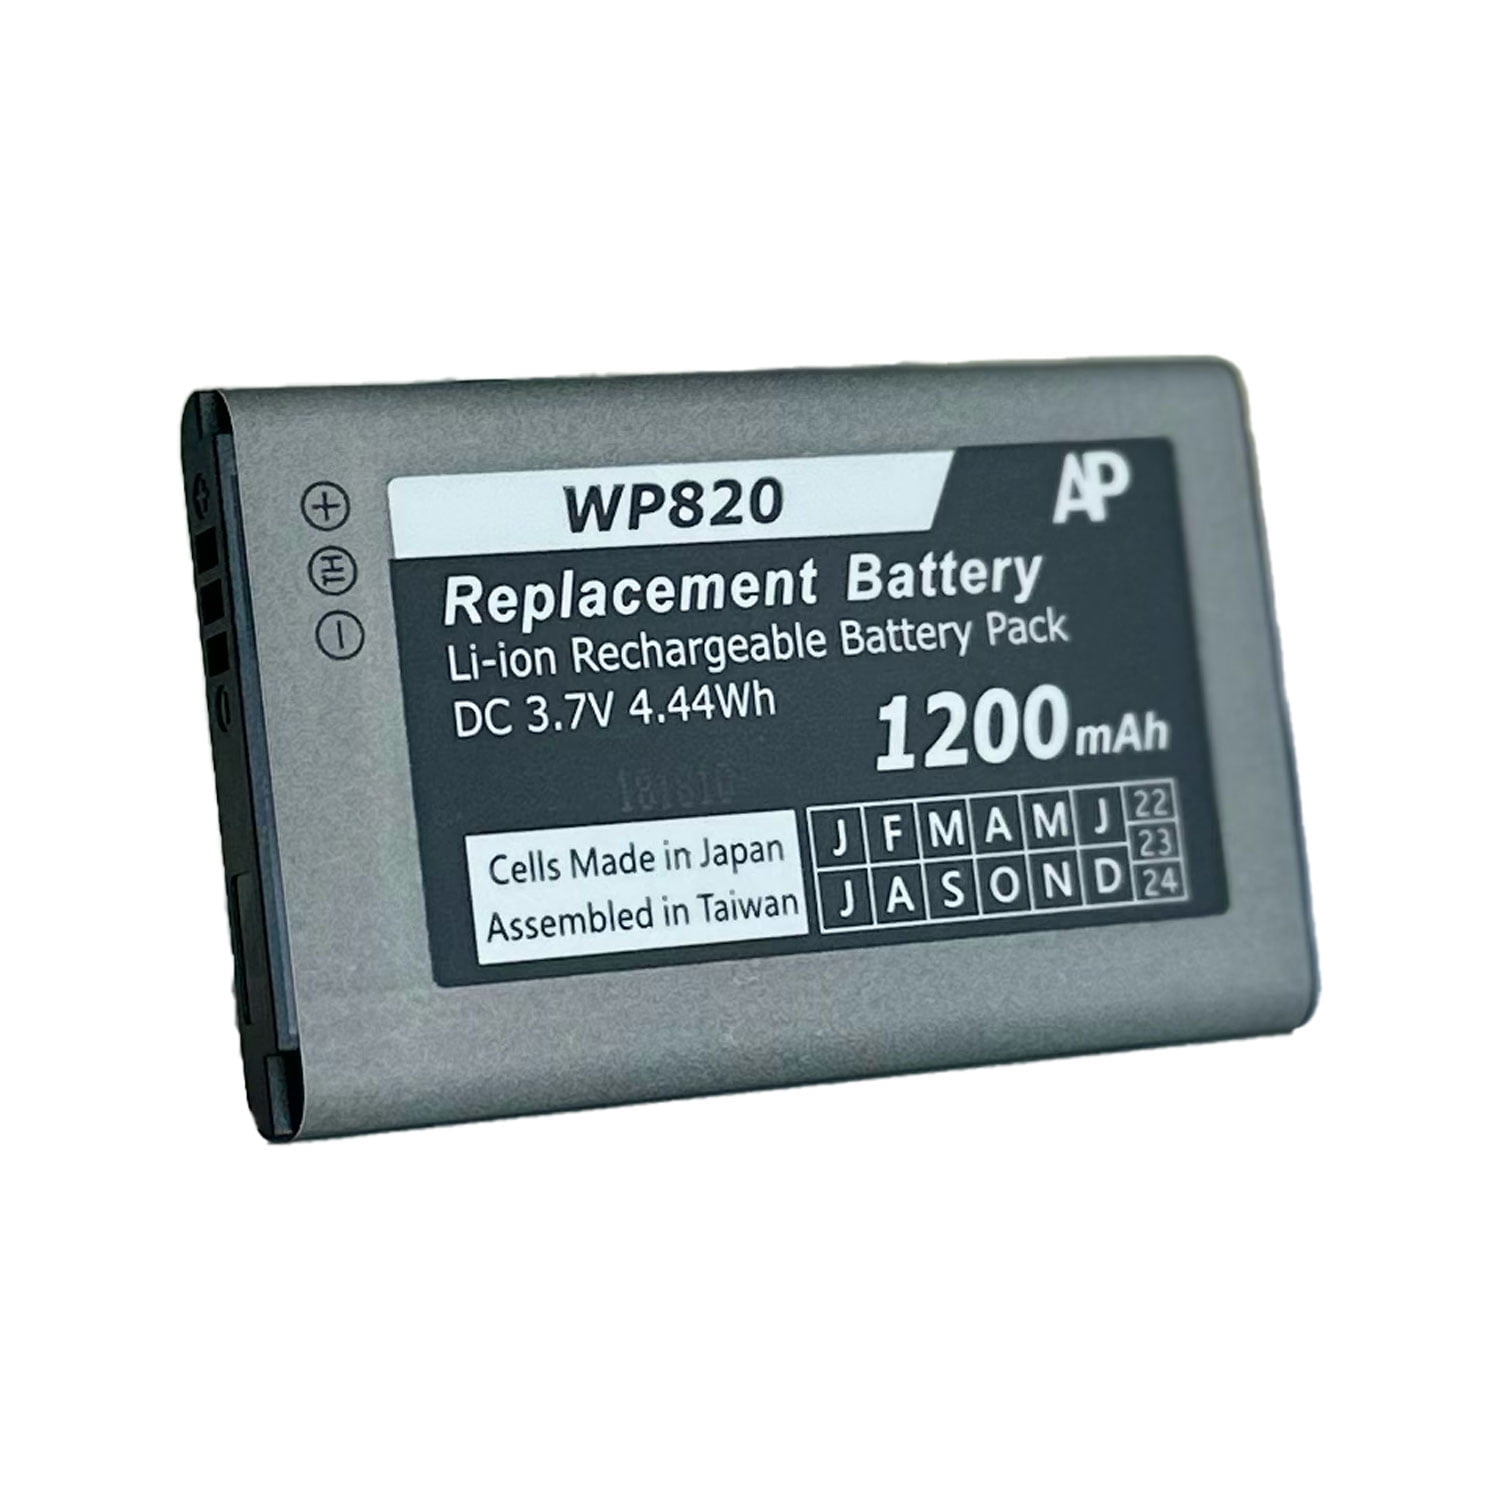 Replacement Battery for Grandstream WP820, WP810, and DP730 Phones